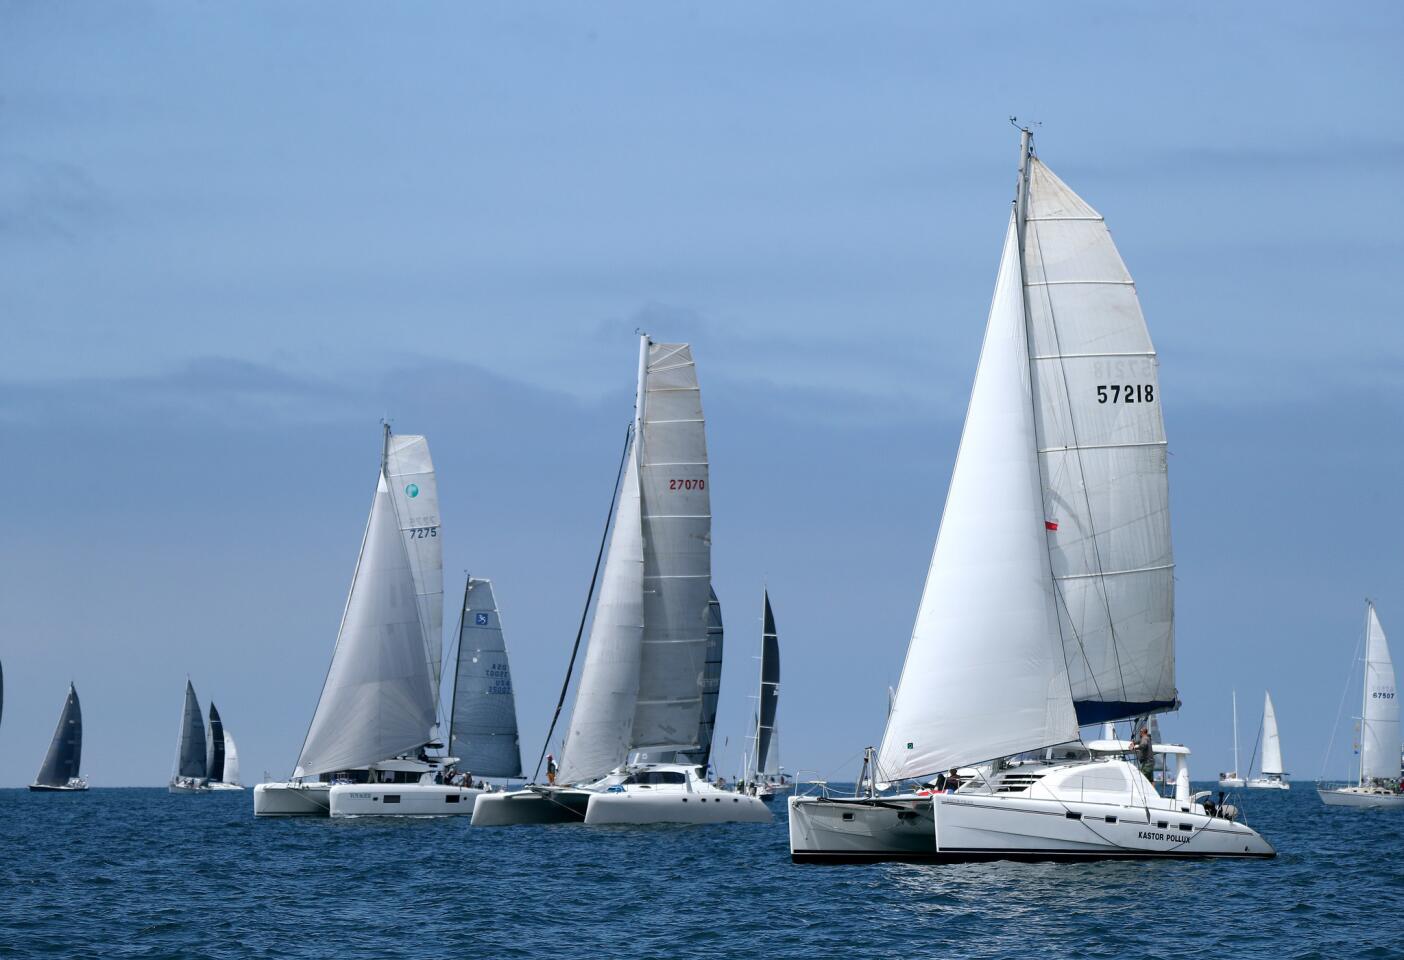 Under clearing skies, the ORCA class Voyager (7275), Wahoo (27070) and Kastor Pollux (57218) take off as the horn sounds for the start of their race, at the 2019 Newport To Ensenada International Yacht Race, off of Newport Beach, on Friday, April 26, 2019.